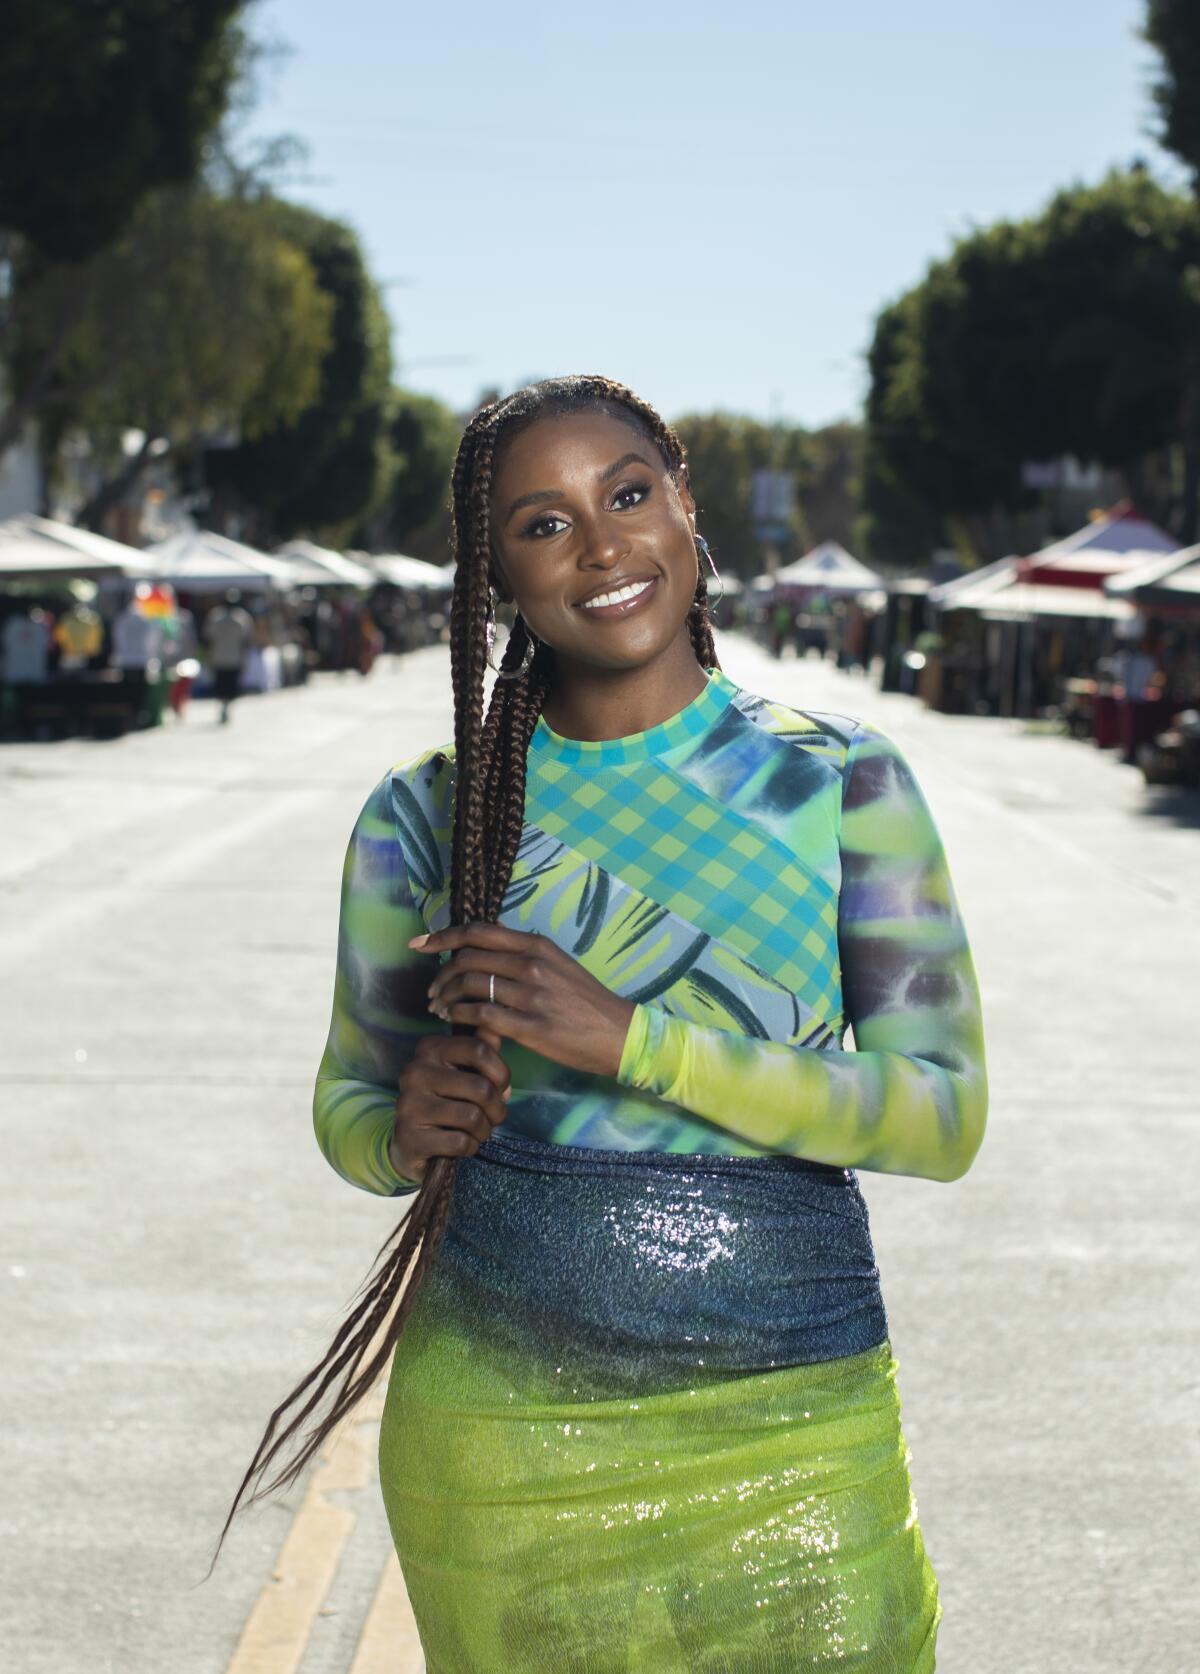 Issa Rael stands in the middle of a street, holding her long braided hair and wearing a bright green patterned outfit